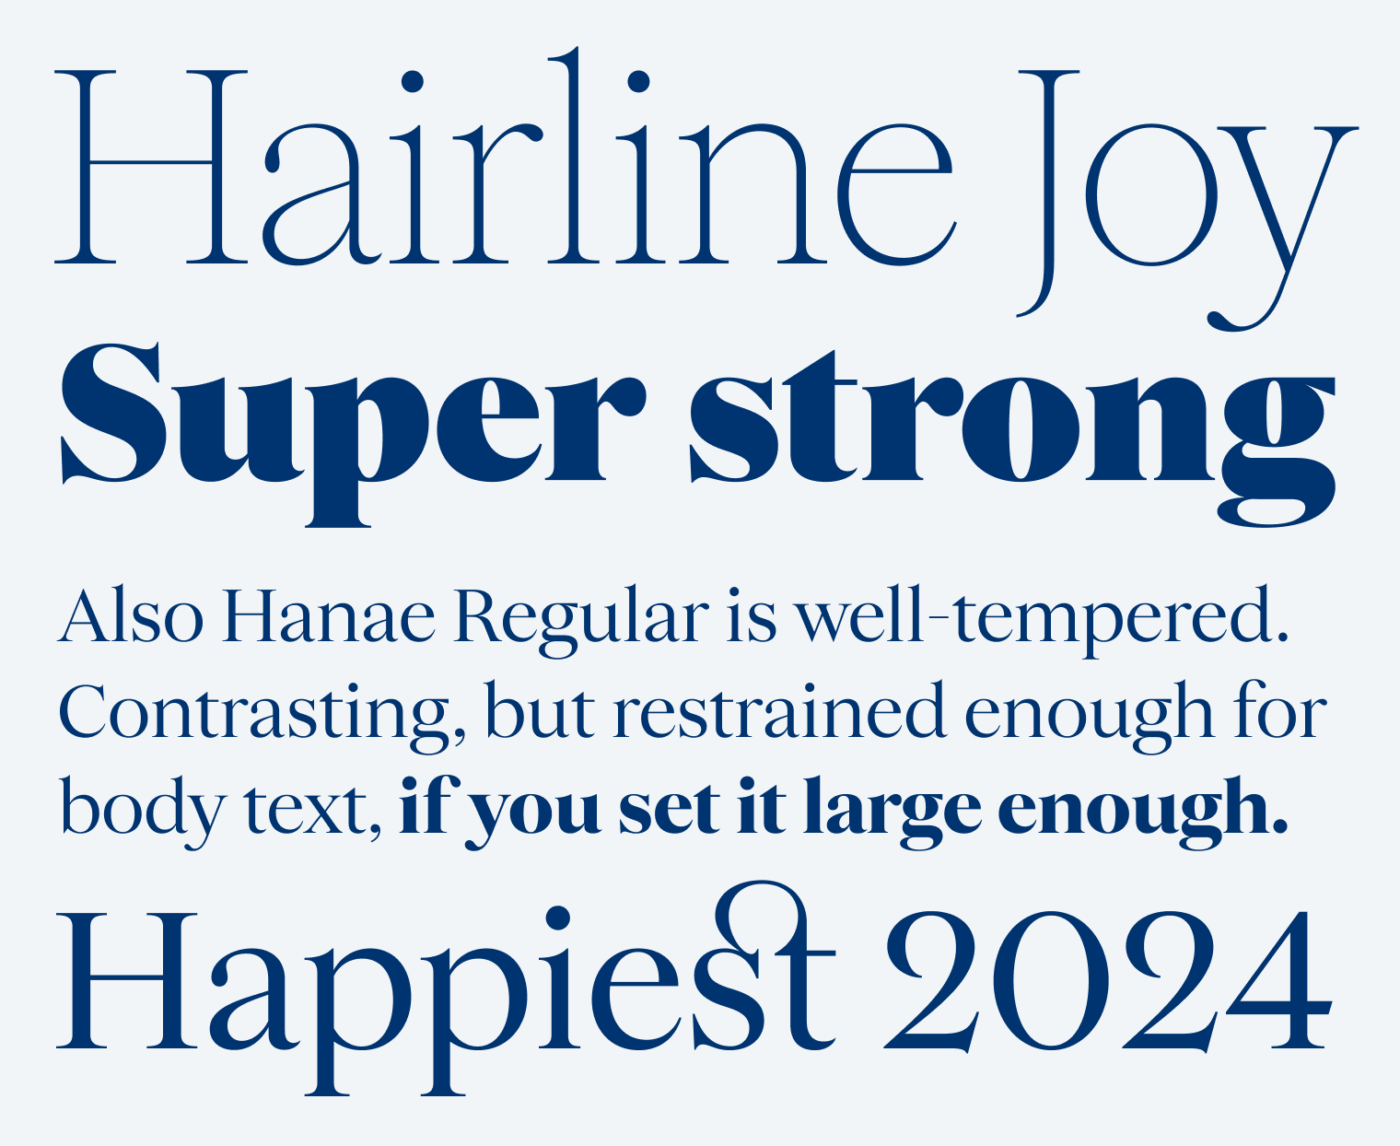 Hairline Joy Super strong Also Hanae Regular is well-tempered.
Contrasting, but restrained enough for body text, if you set it large enough. Happiest 2024